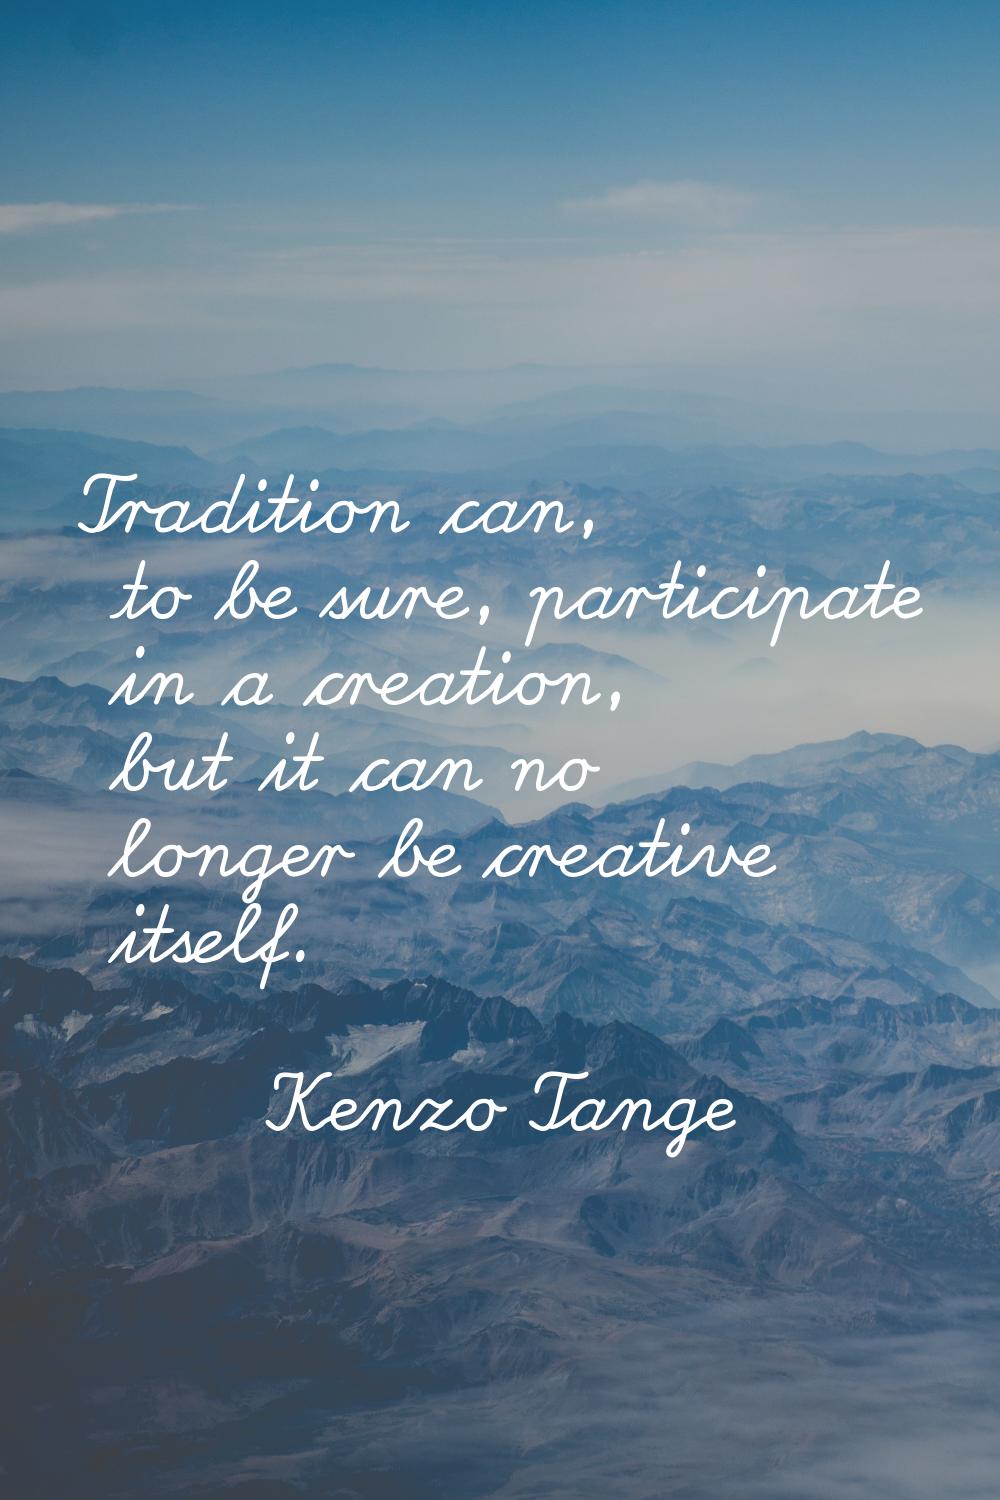 Tradition can, to be sure, participate in a creation, but it can no longer be creative itself.